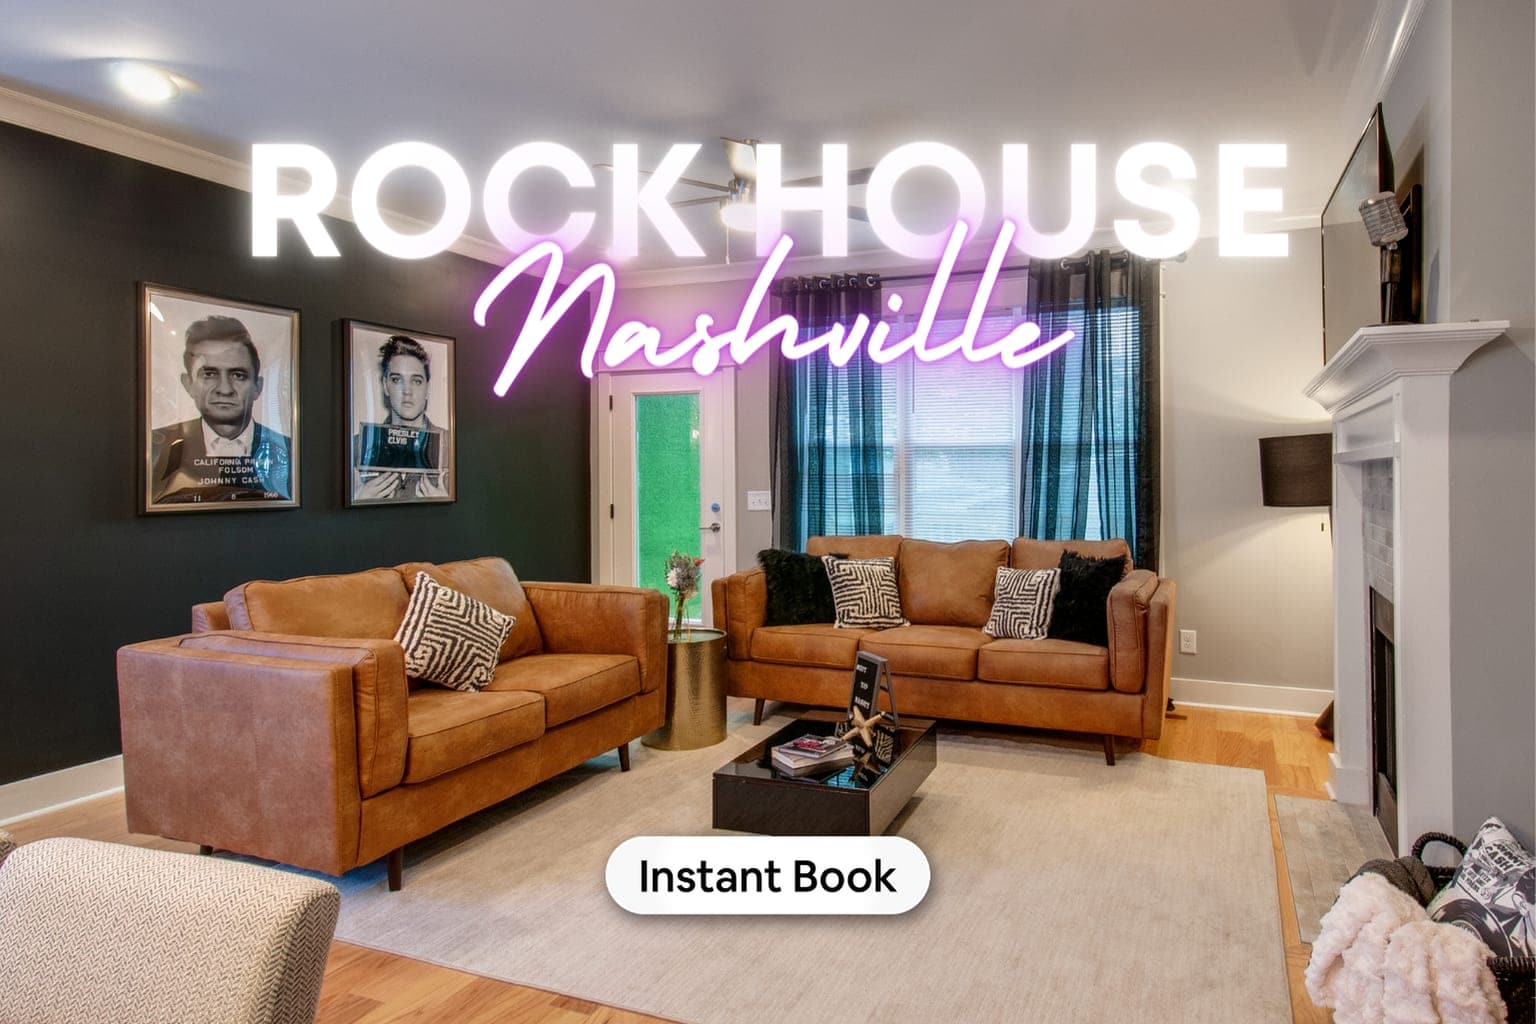 Immerse in Nashville's vibe at Rock House, where luxury meets Music City's energy perfect for your next bachelorette or friend group vacation rental. Cozy up on plush caramel couches for a night of laughter and tunes, framed by iconic neon signs that scream Nashville fun. 🎸✨ Feel the rhythm of the city and make unforgettable memories—just click 'Instant Book' with Misfit Homes to secure your stay at this ultimate vacation spot.